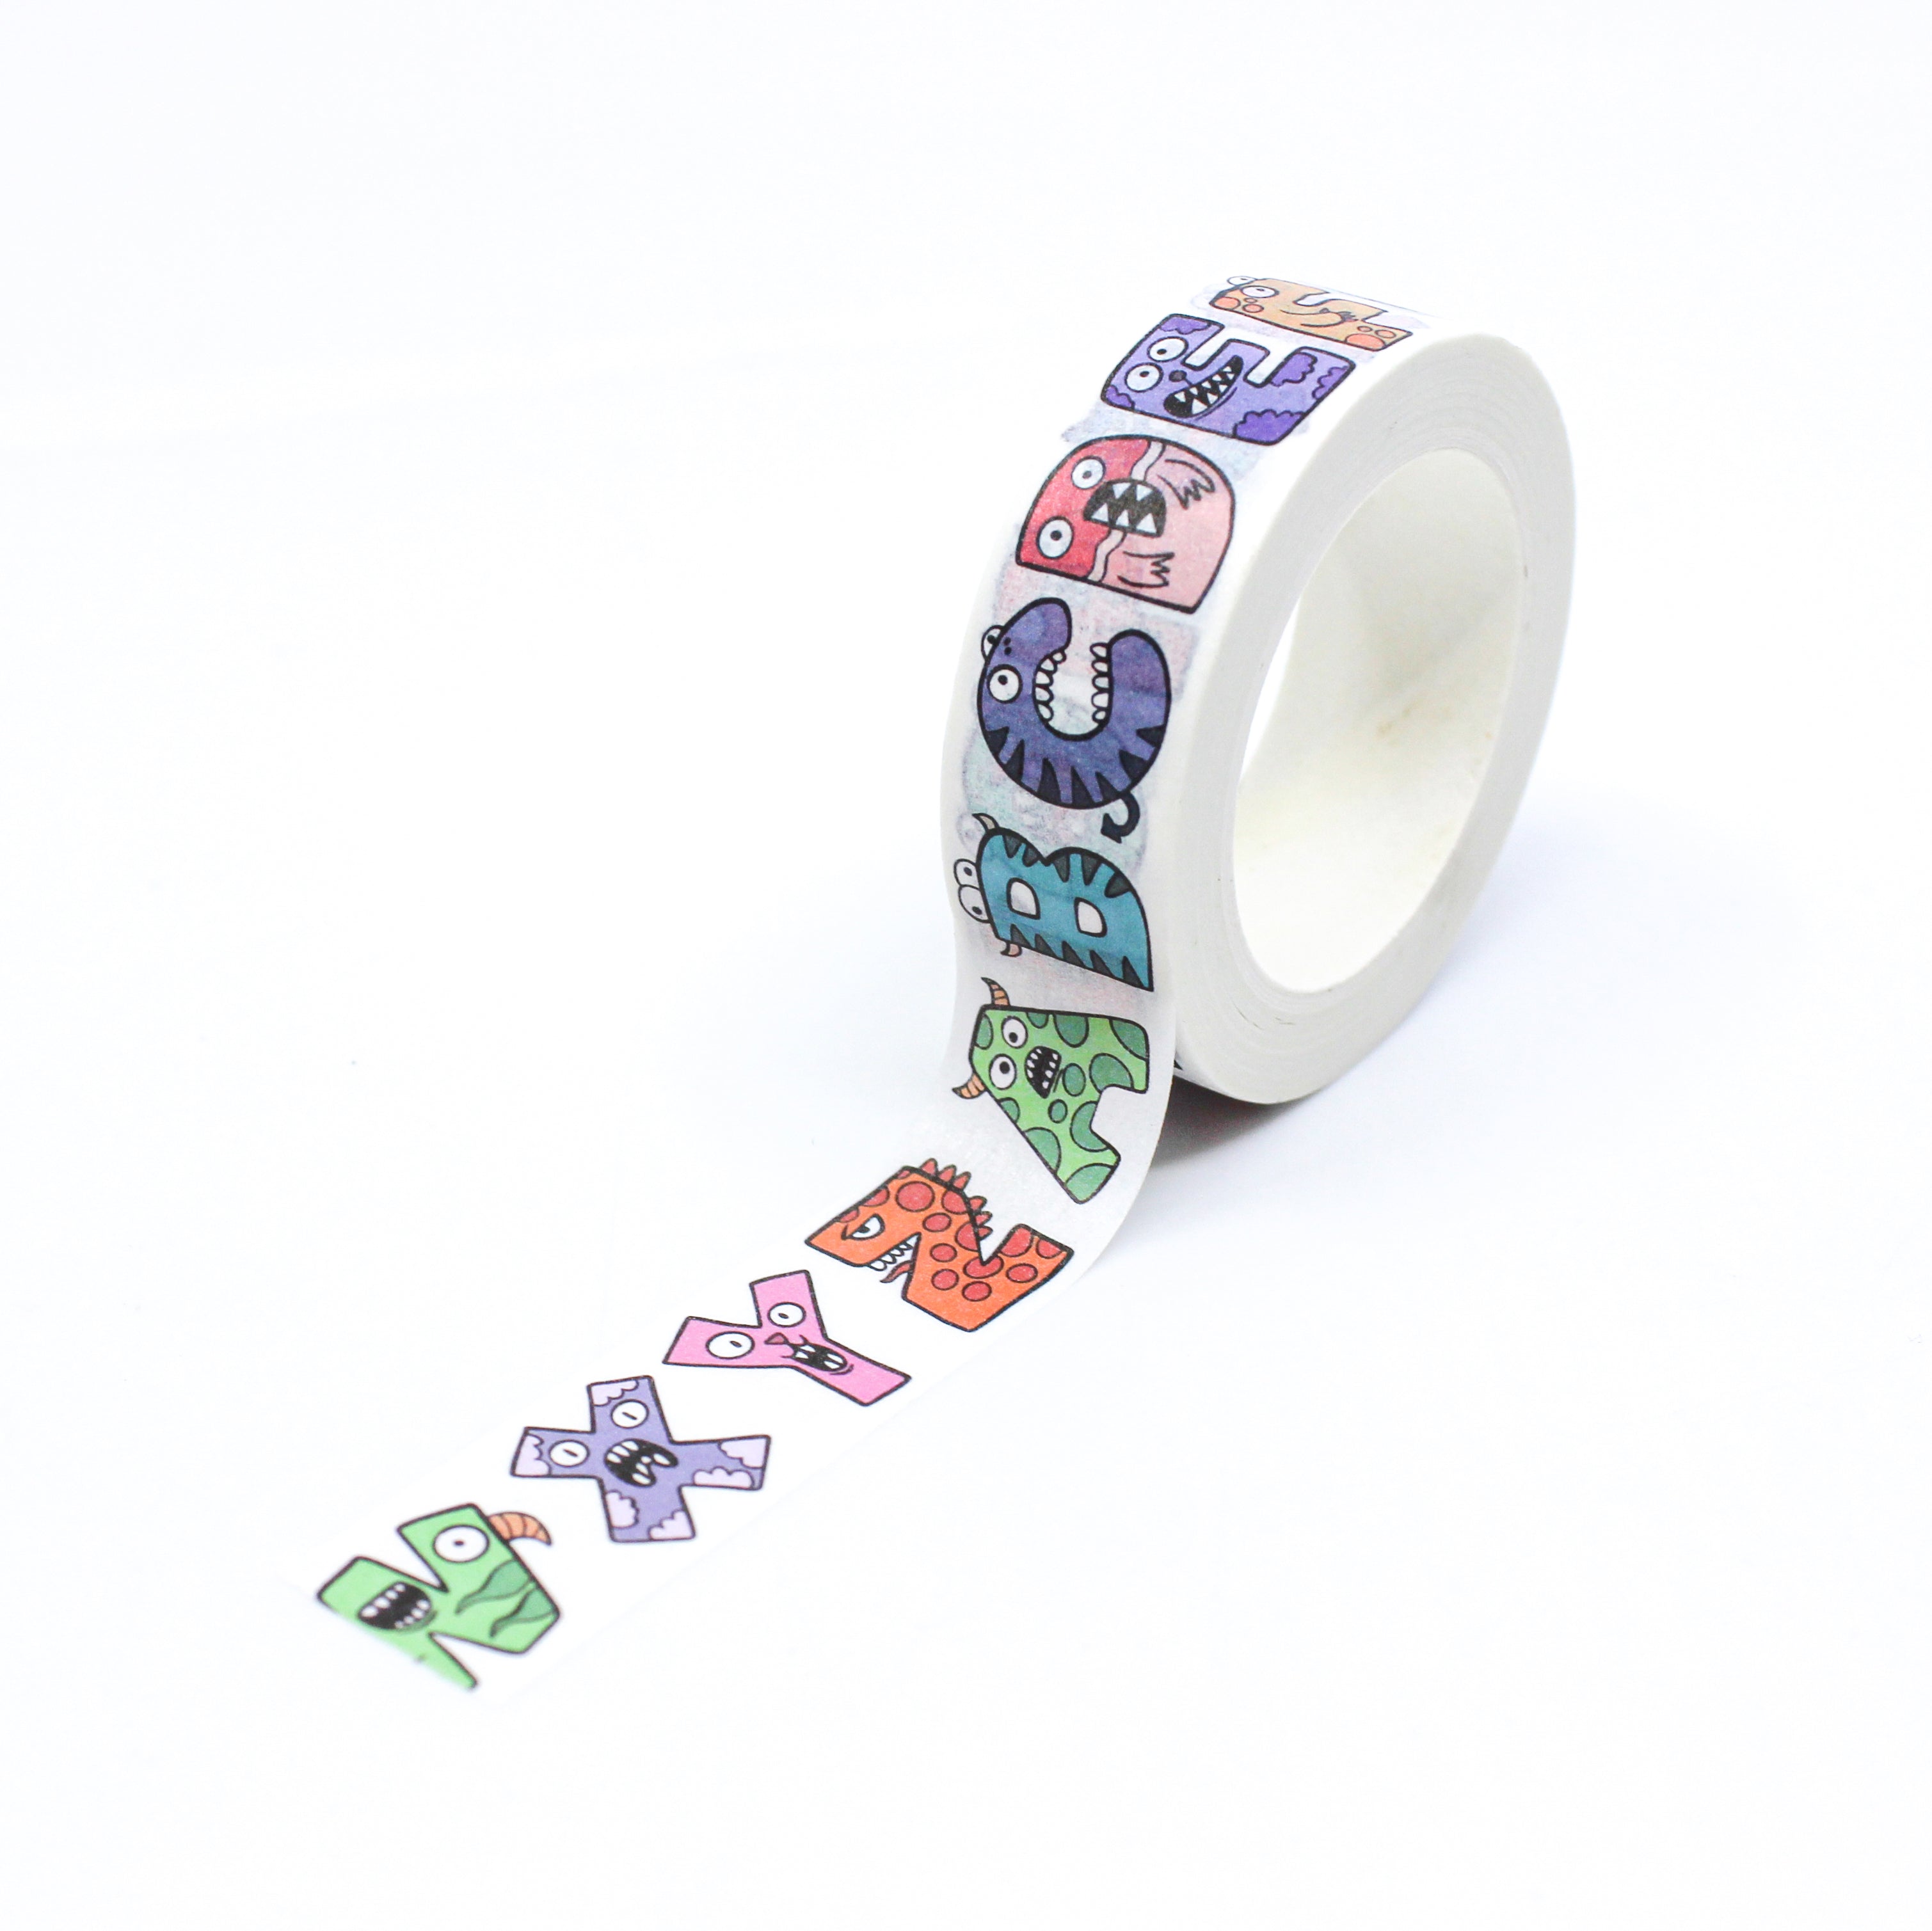 Alphabet Washi Tape (1 Roll - 9/16 Wide x 10.95 Yards Long) - ABC Letters  Kids Learning Tools, Teacher Education Supplies, Cute Washi Tape, Crafting